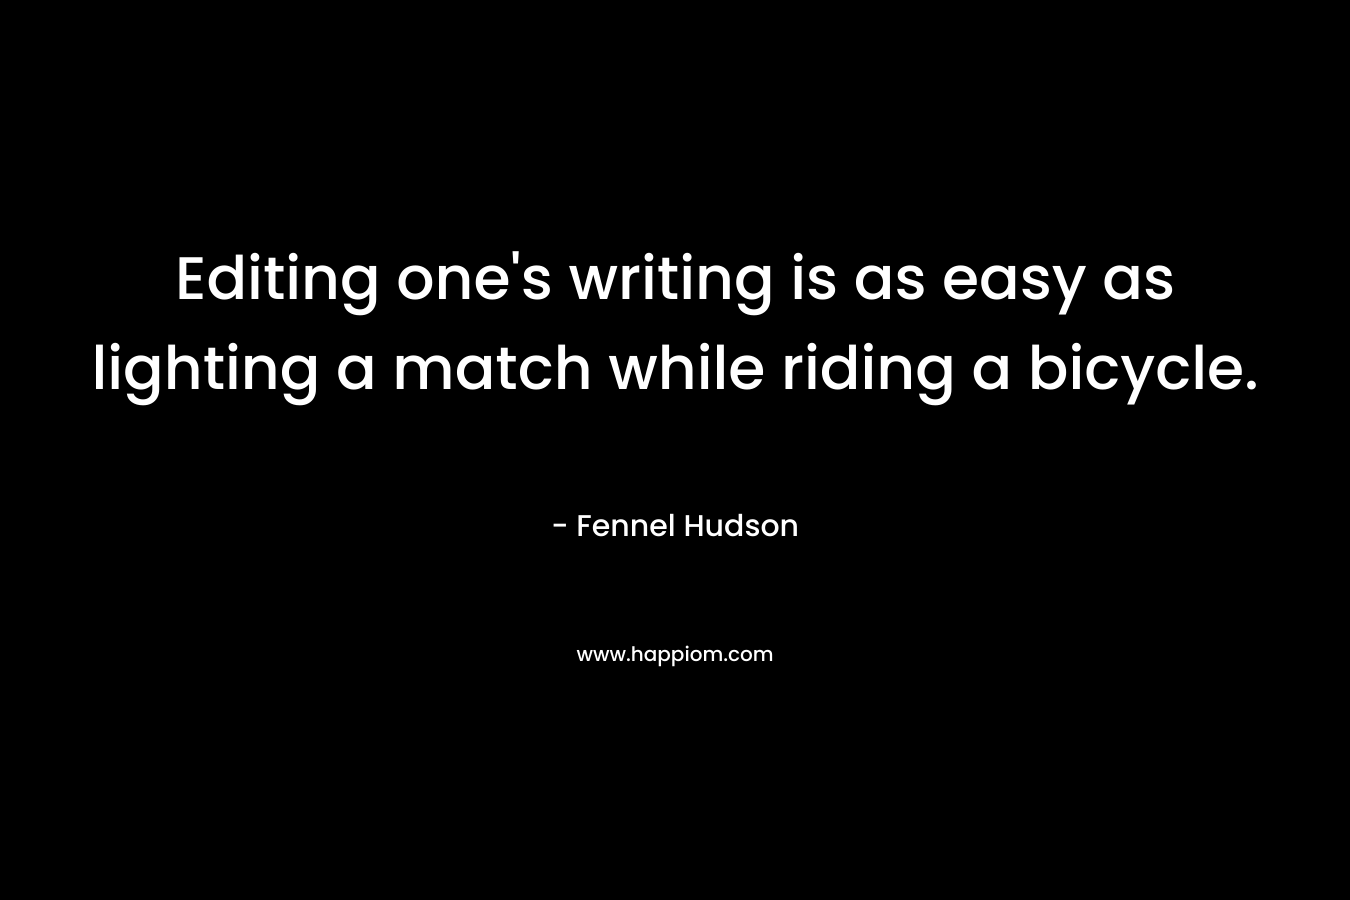 Editing one’s writing is as easy as lighting a match while riding a bicycle. – Fennel Hudson